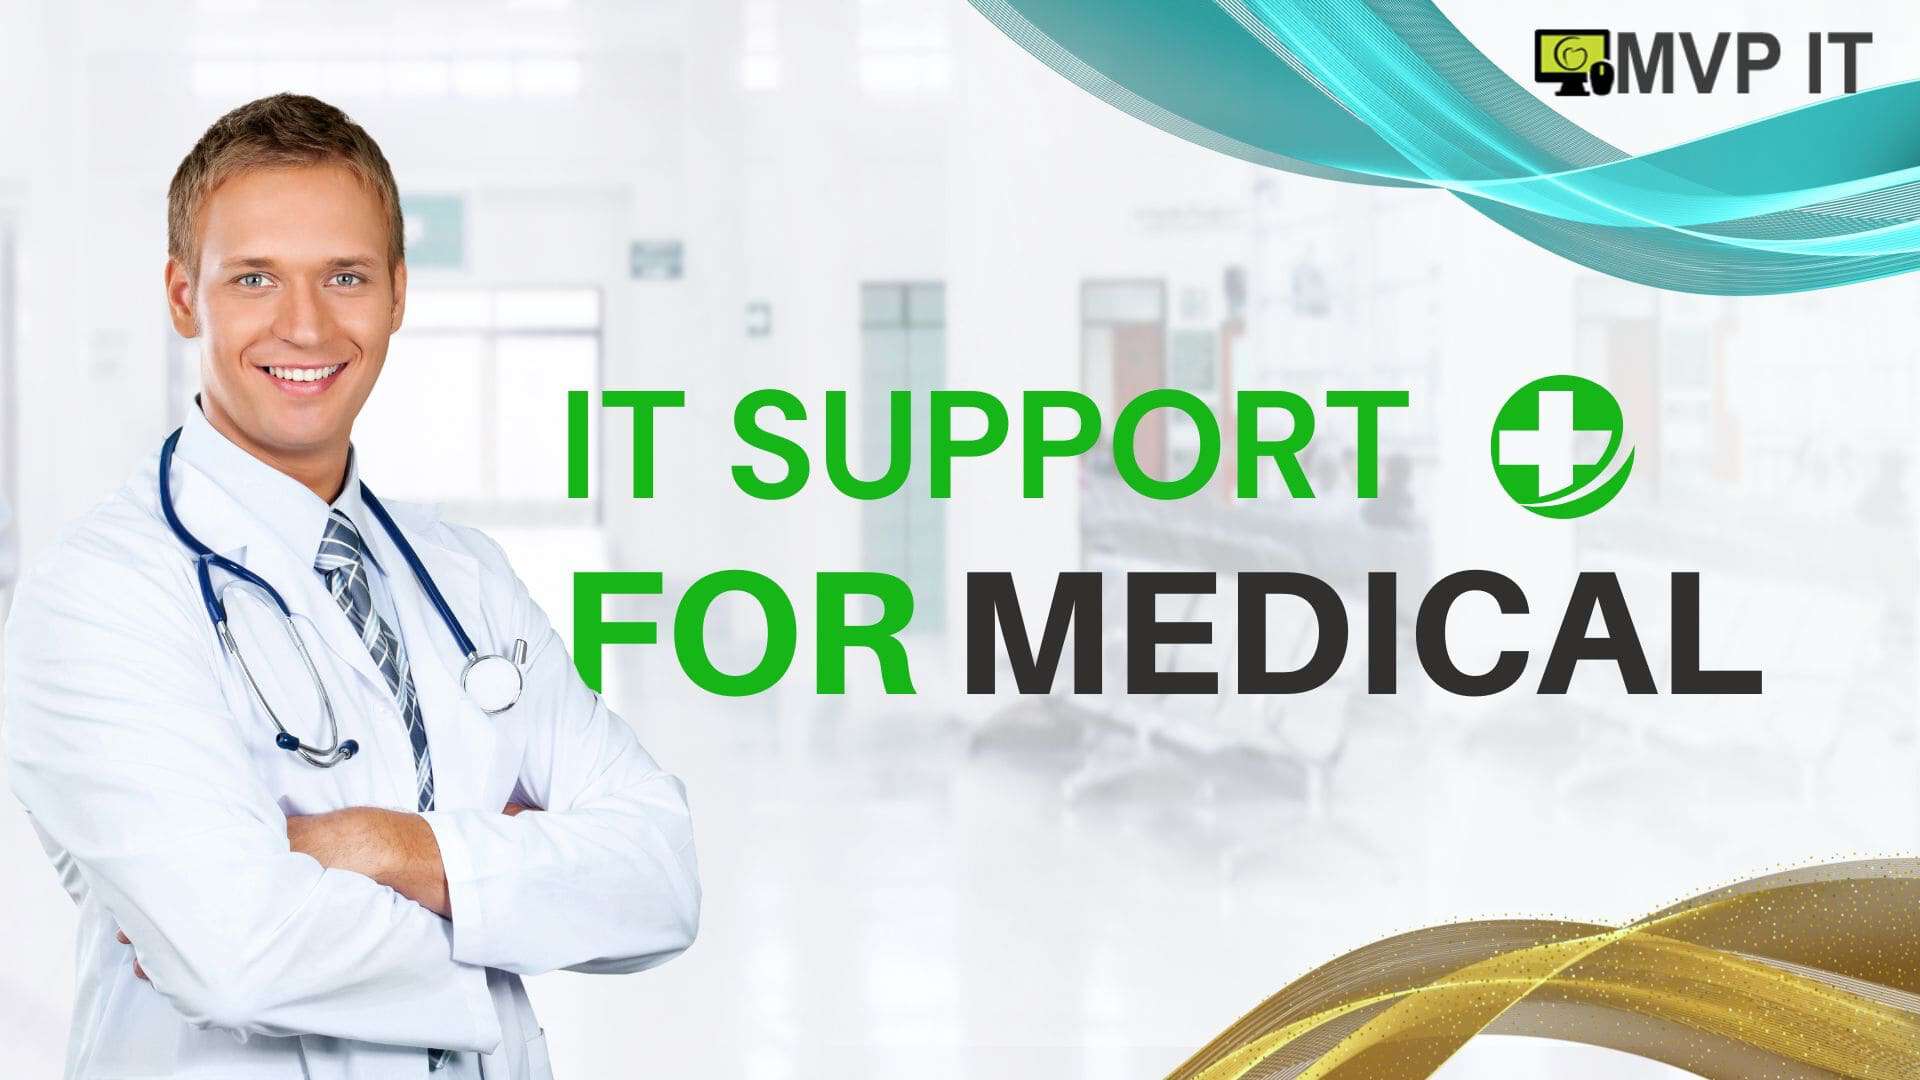 IT Support for Medical